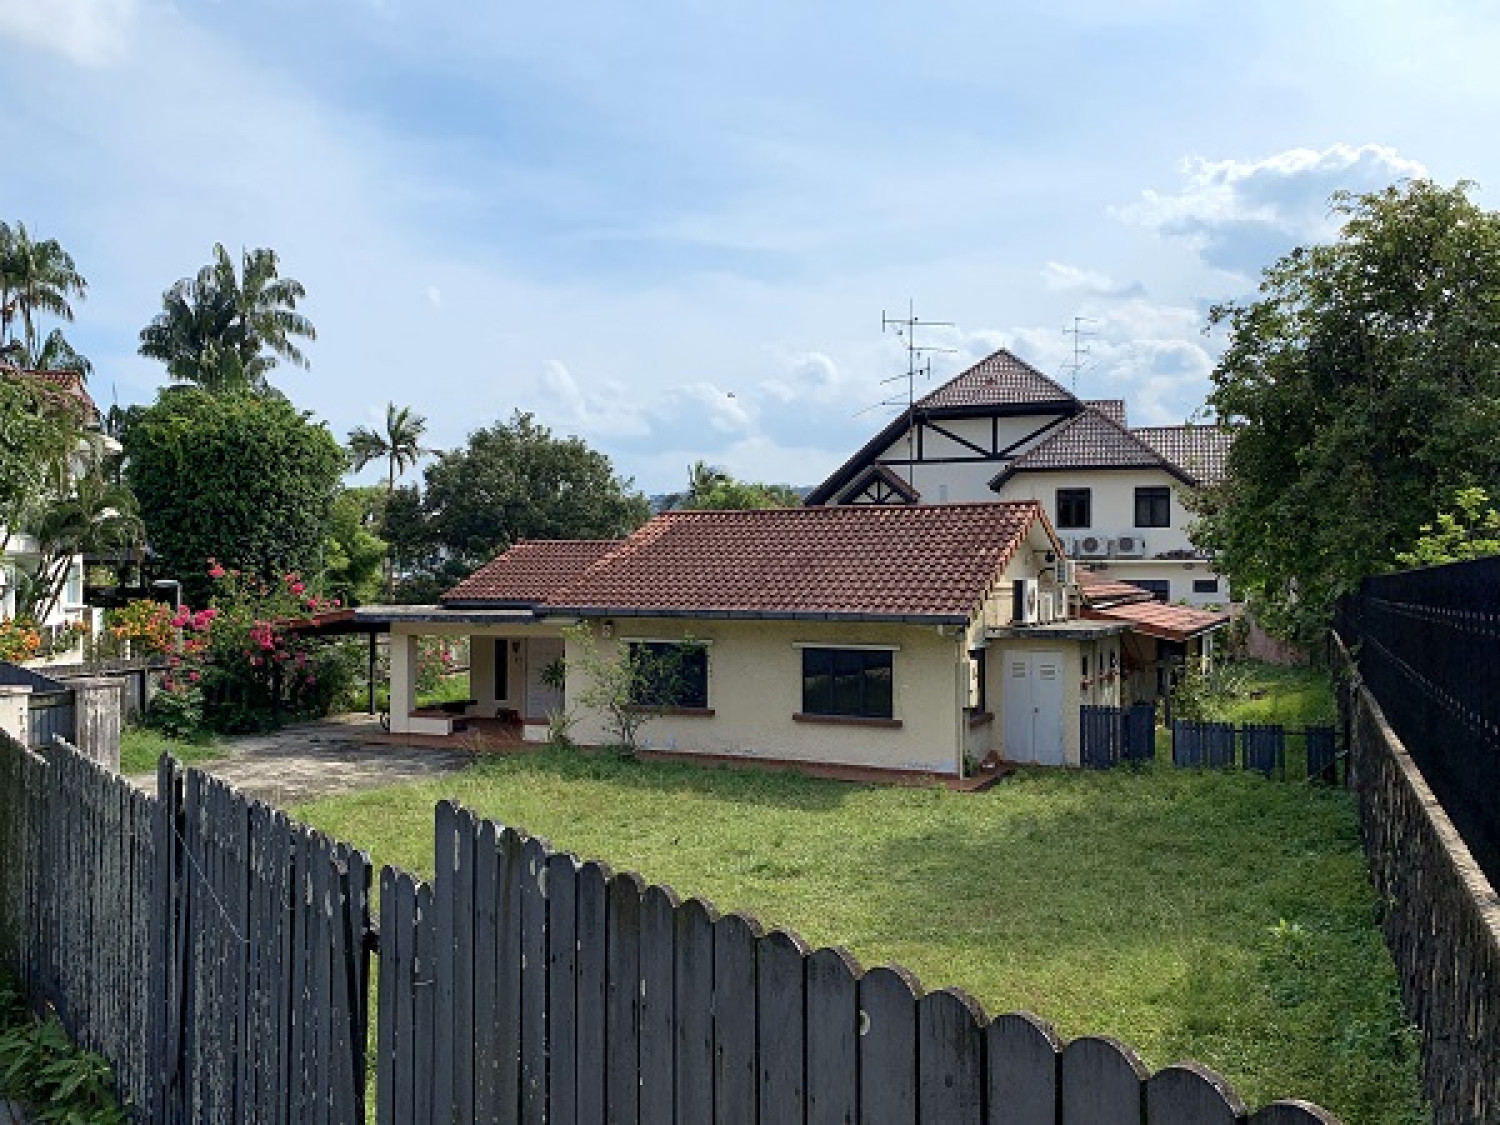 Good Class Bungalow in Bukit Panjang and shophouse at Neil Road up for auction - Property News